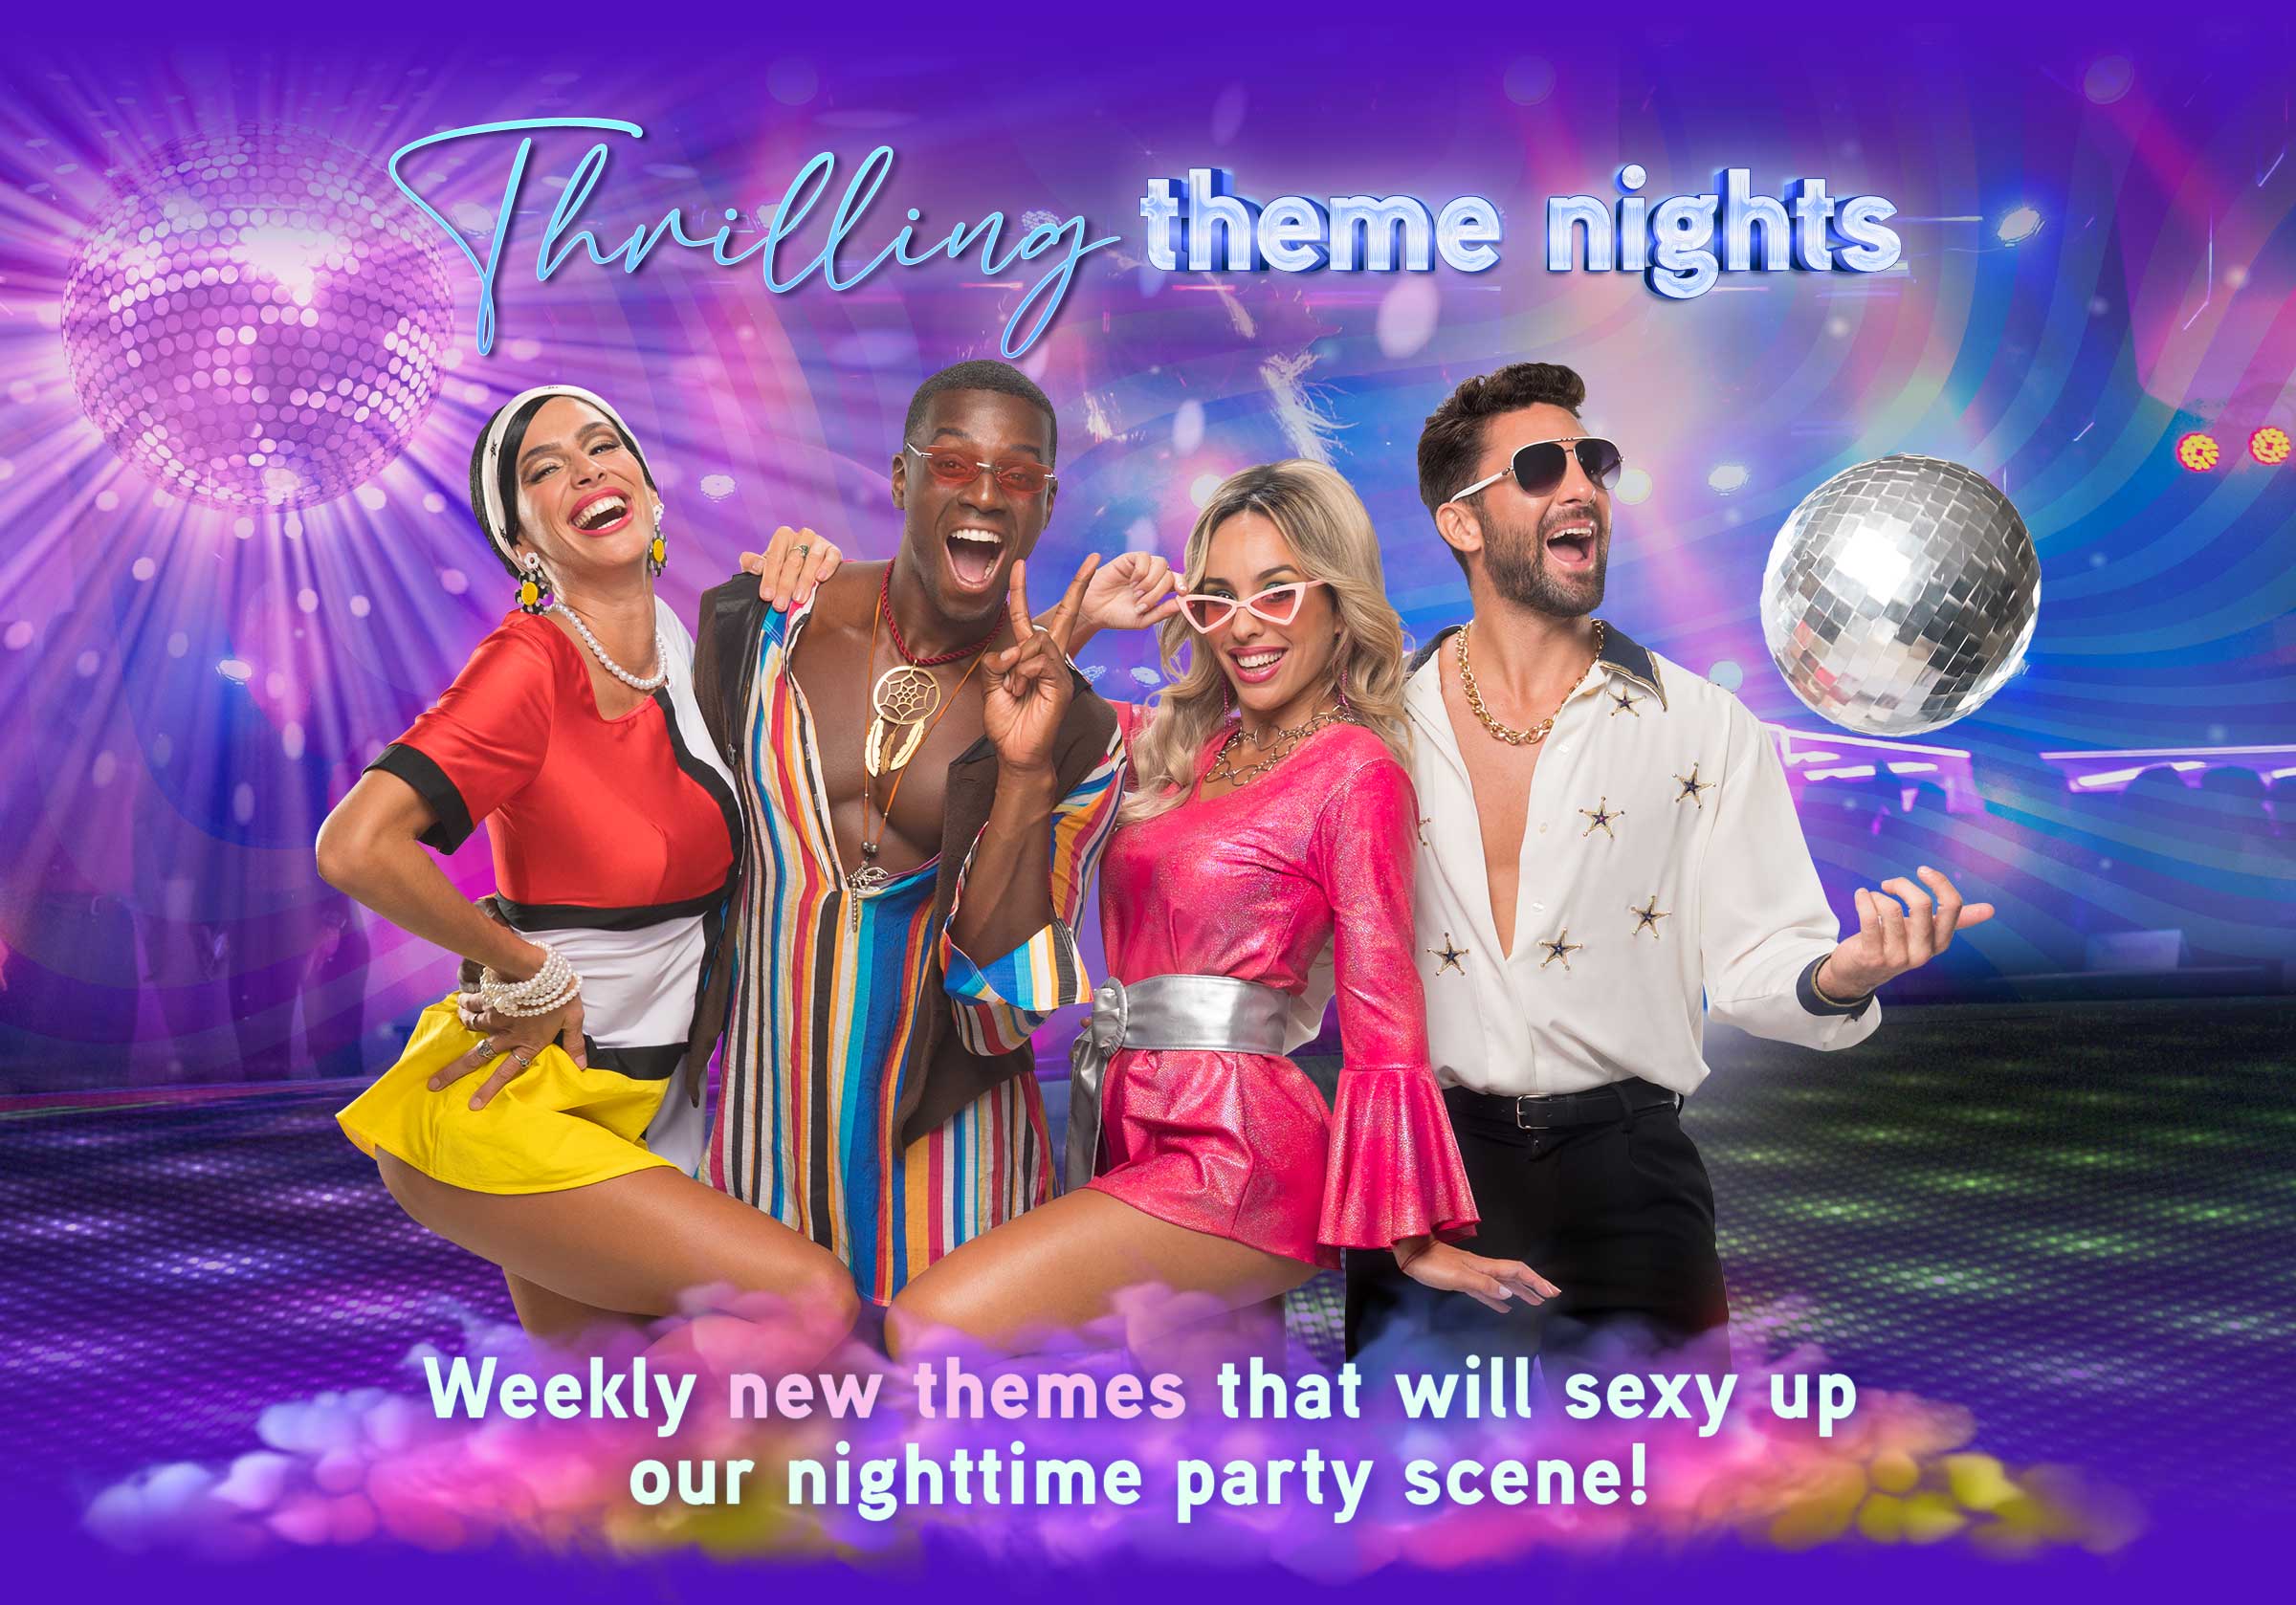 THRILLING THEME NIGHTS, Weekly new themes that will our nighttime party scene!